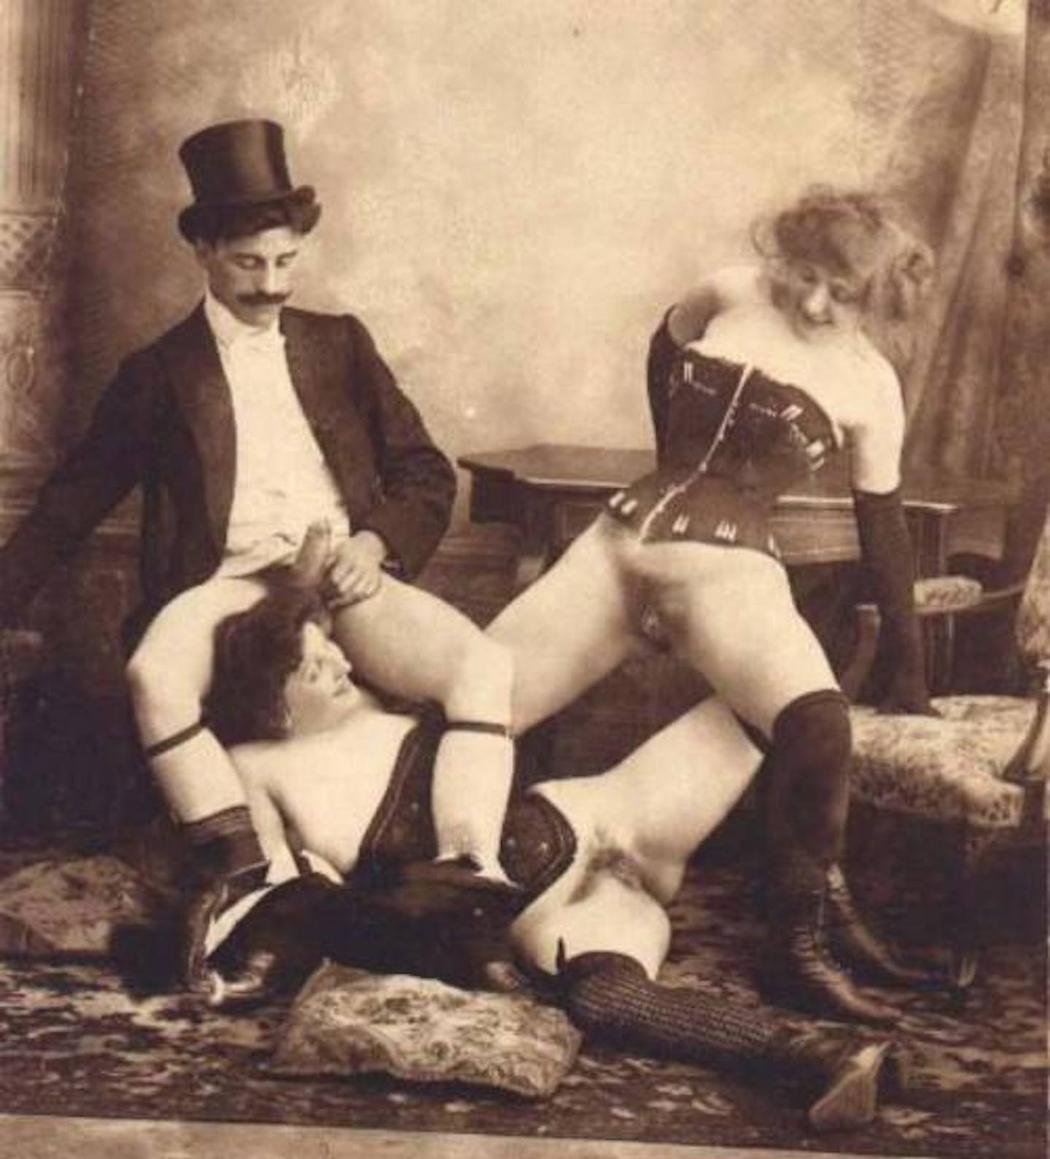 Vintage Anal Porn From 1900 - Victorian Porn - 49 photos